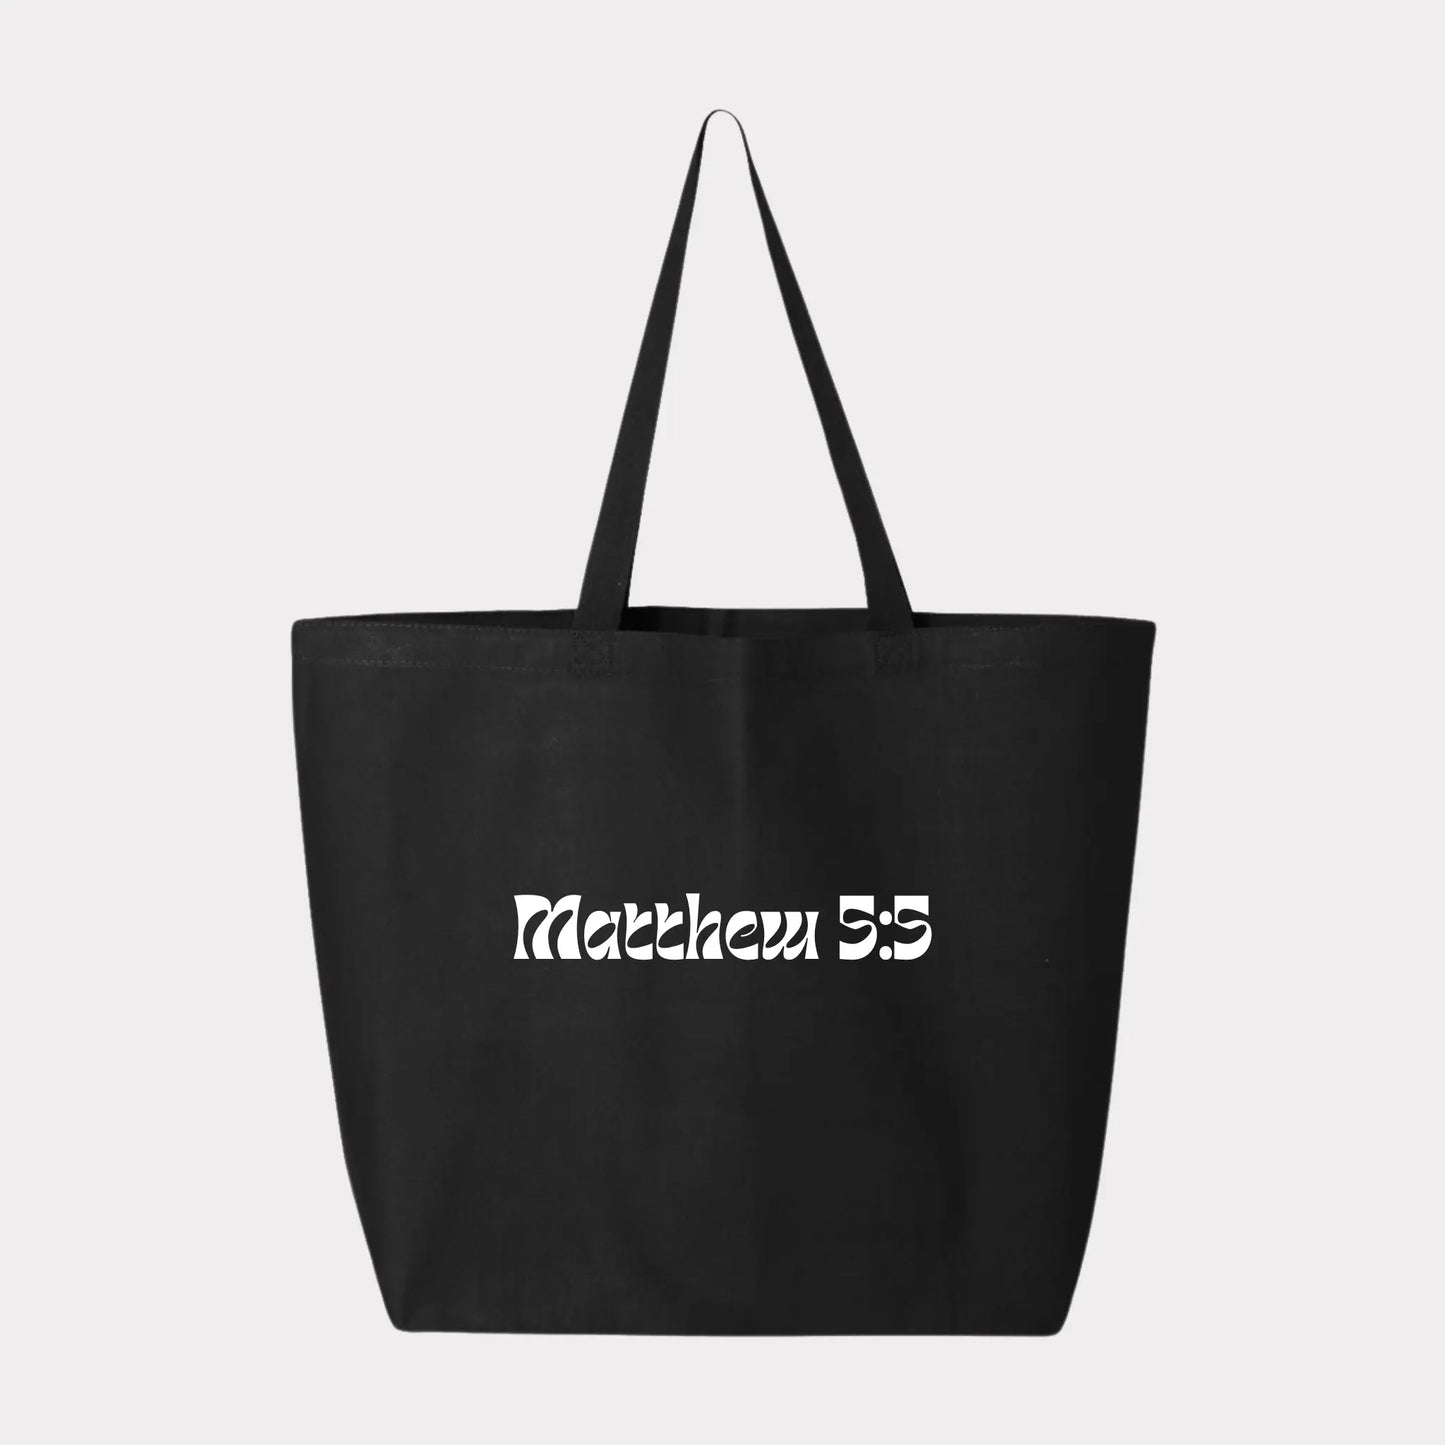 Blessed Cavas Tote bag. Blessed tote bag. Blessed jumbo canvas tote bag. Christian clothing brand. Christian streetwear. Christian accessories . Black tote bag. Black canvas tote bag. Matthew 5:5 tote bag. Blessed tote bag. Mathew 5:5 purse.  Blessed jumbo canvas tote bag by Crown of Favor